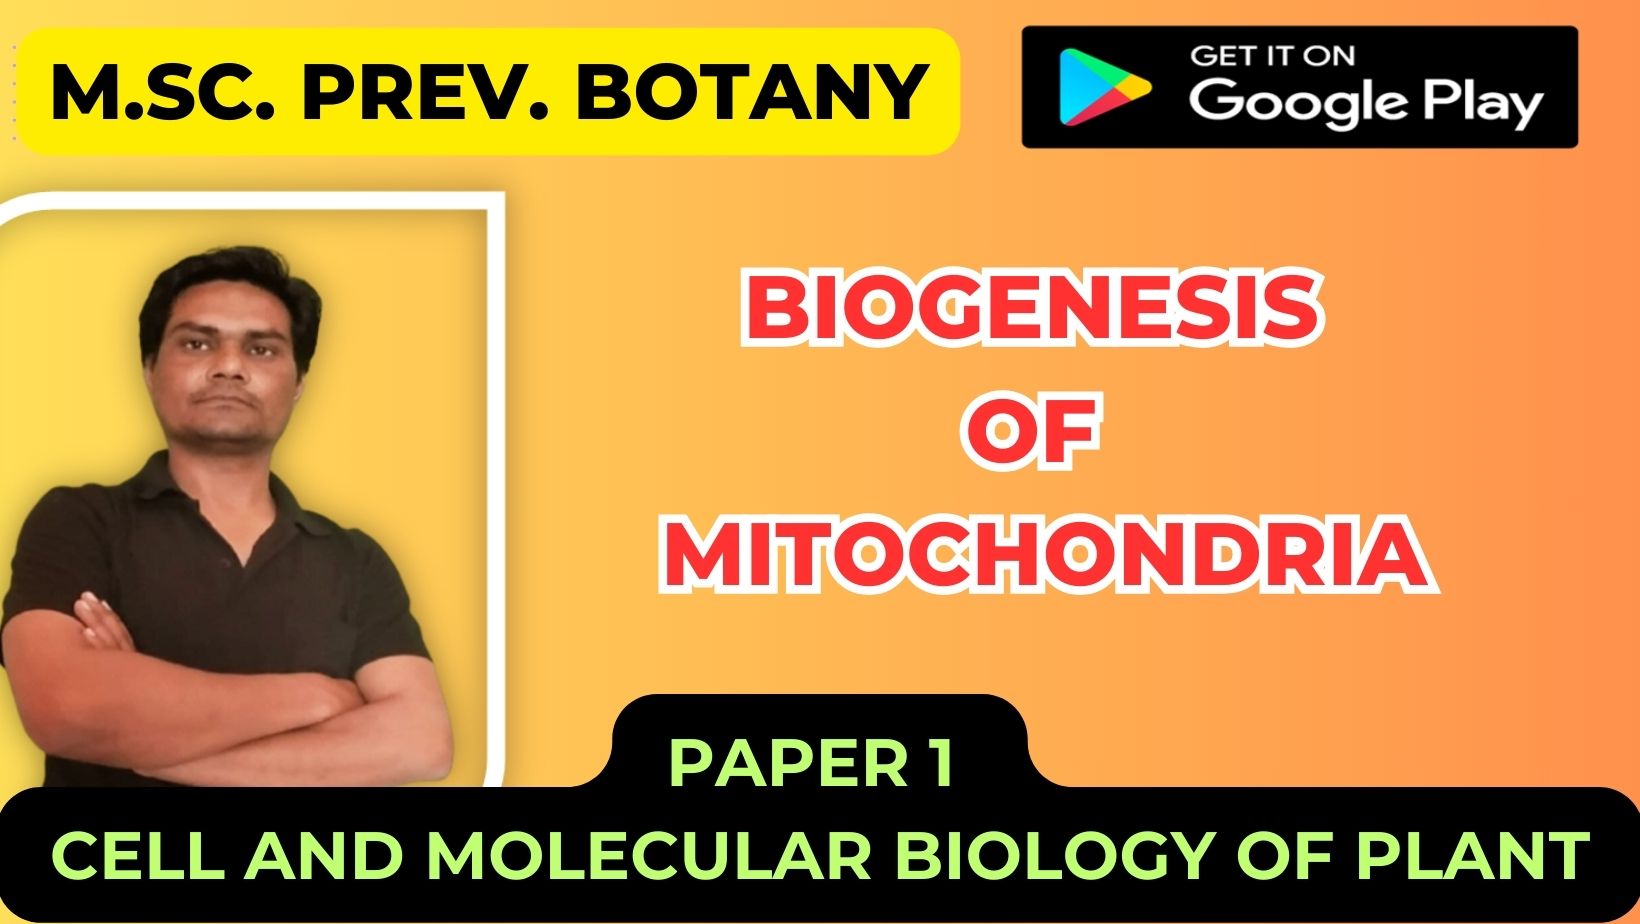 You are currently viewing Biogenesis of Mitochondria